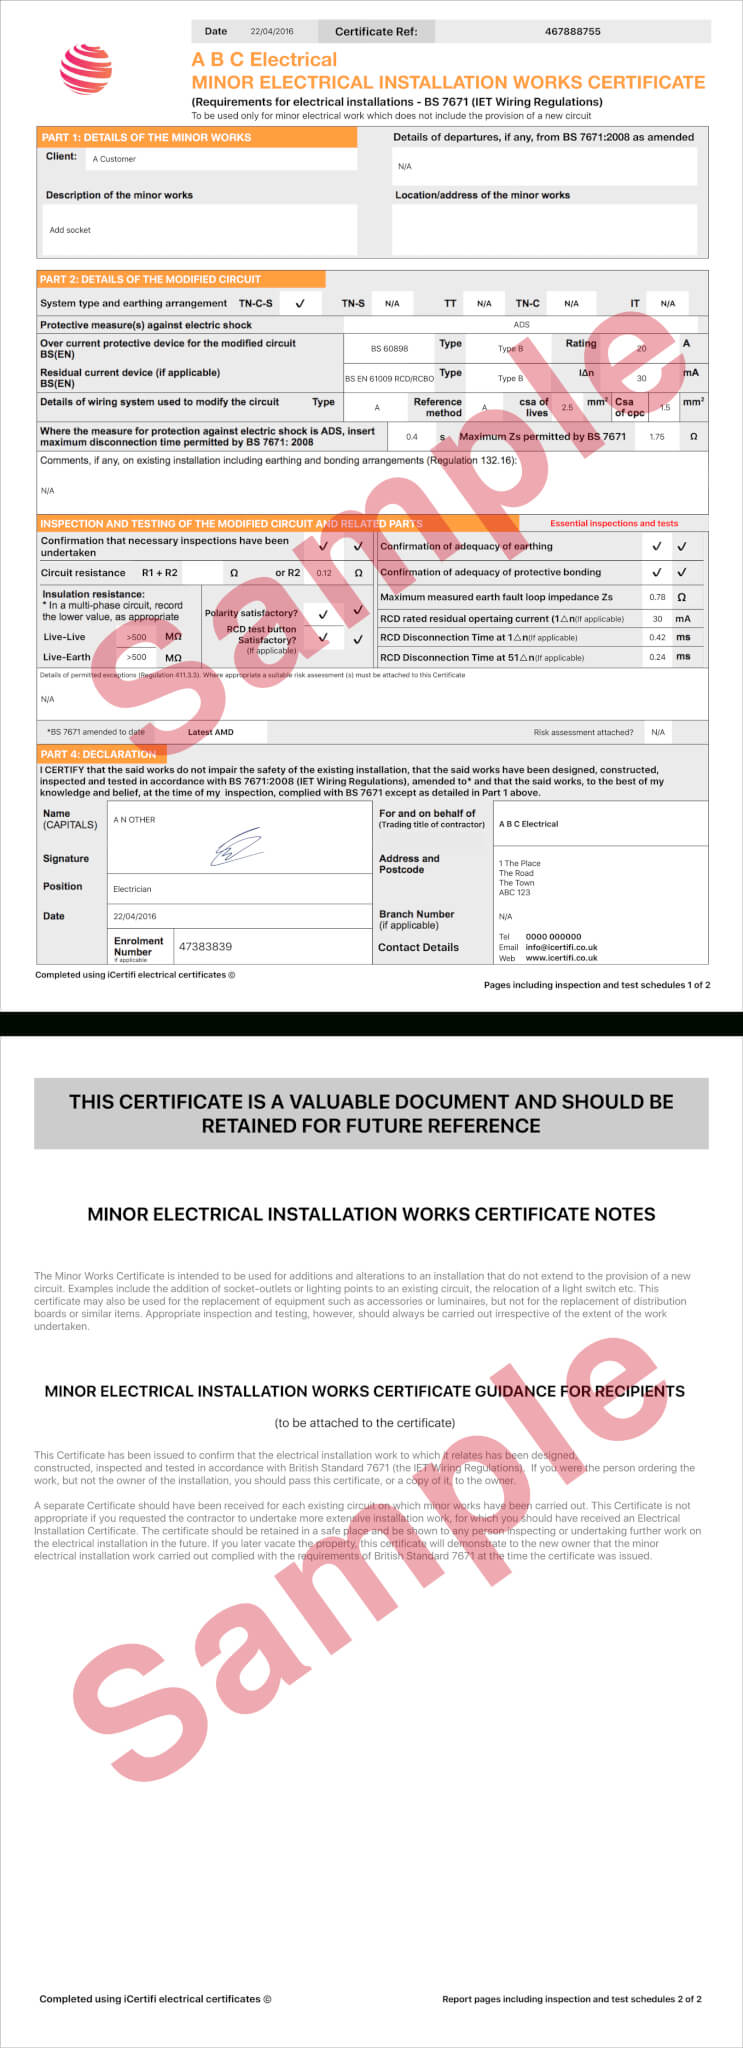 Electrical Certificate – Example Minor Works Certificate Throughout Minor Electrical Installation Works Certificate Template